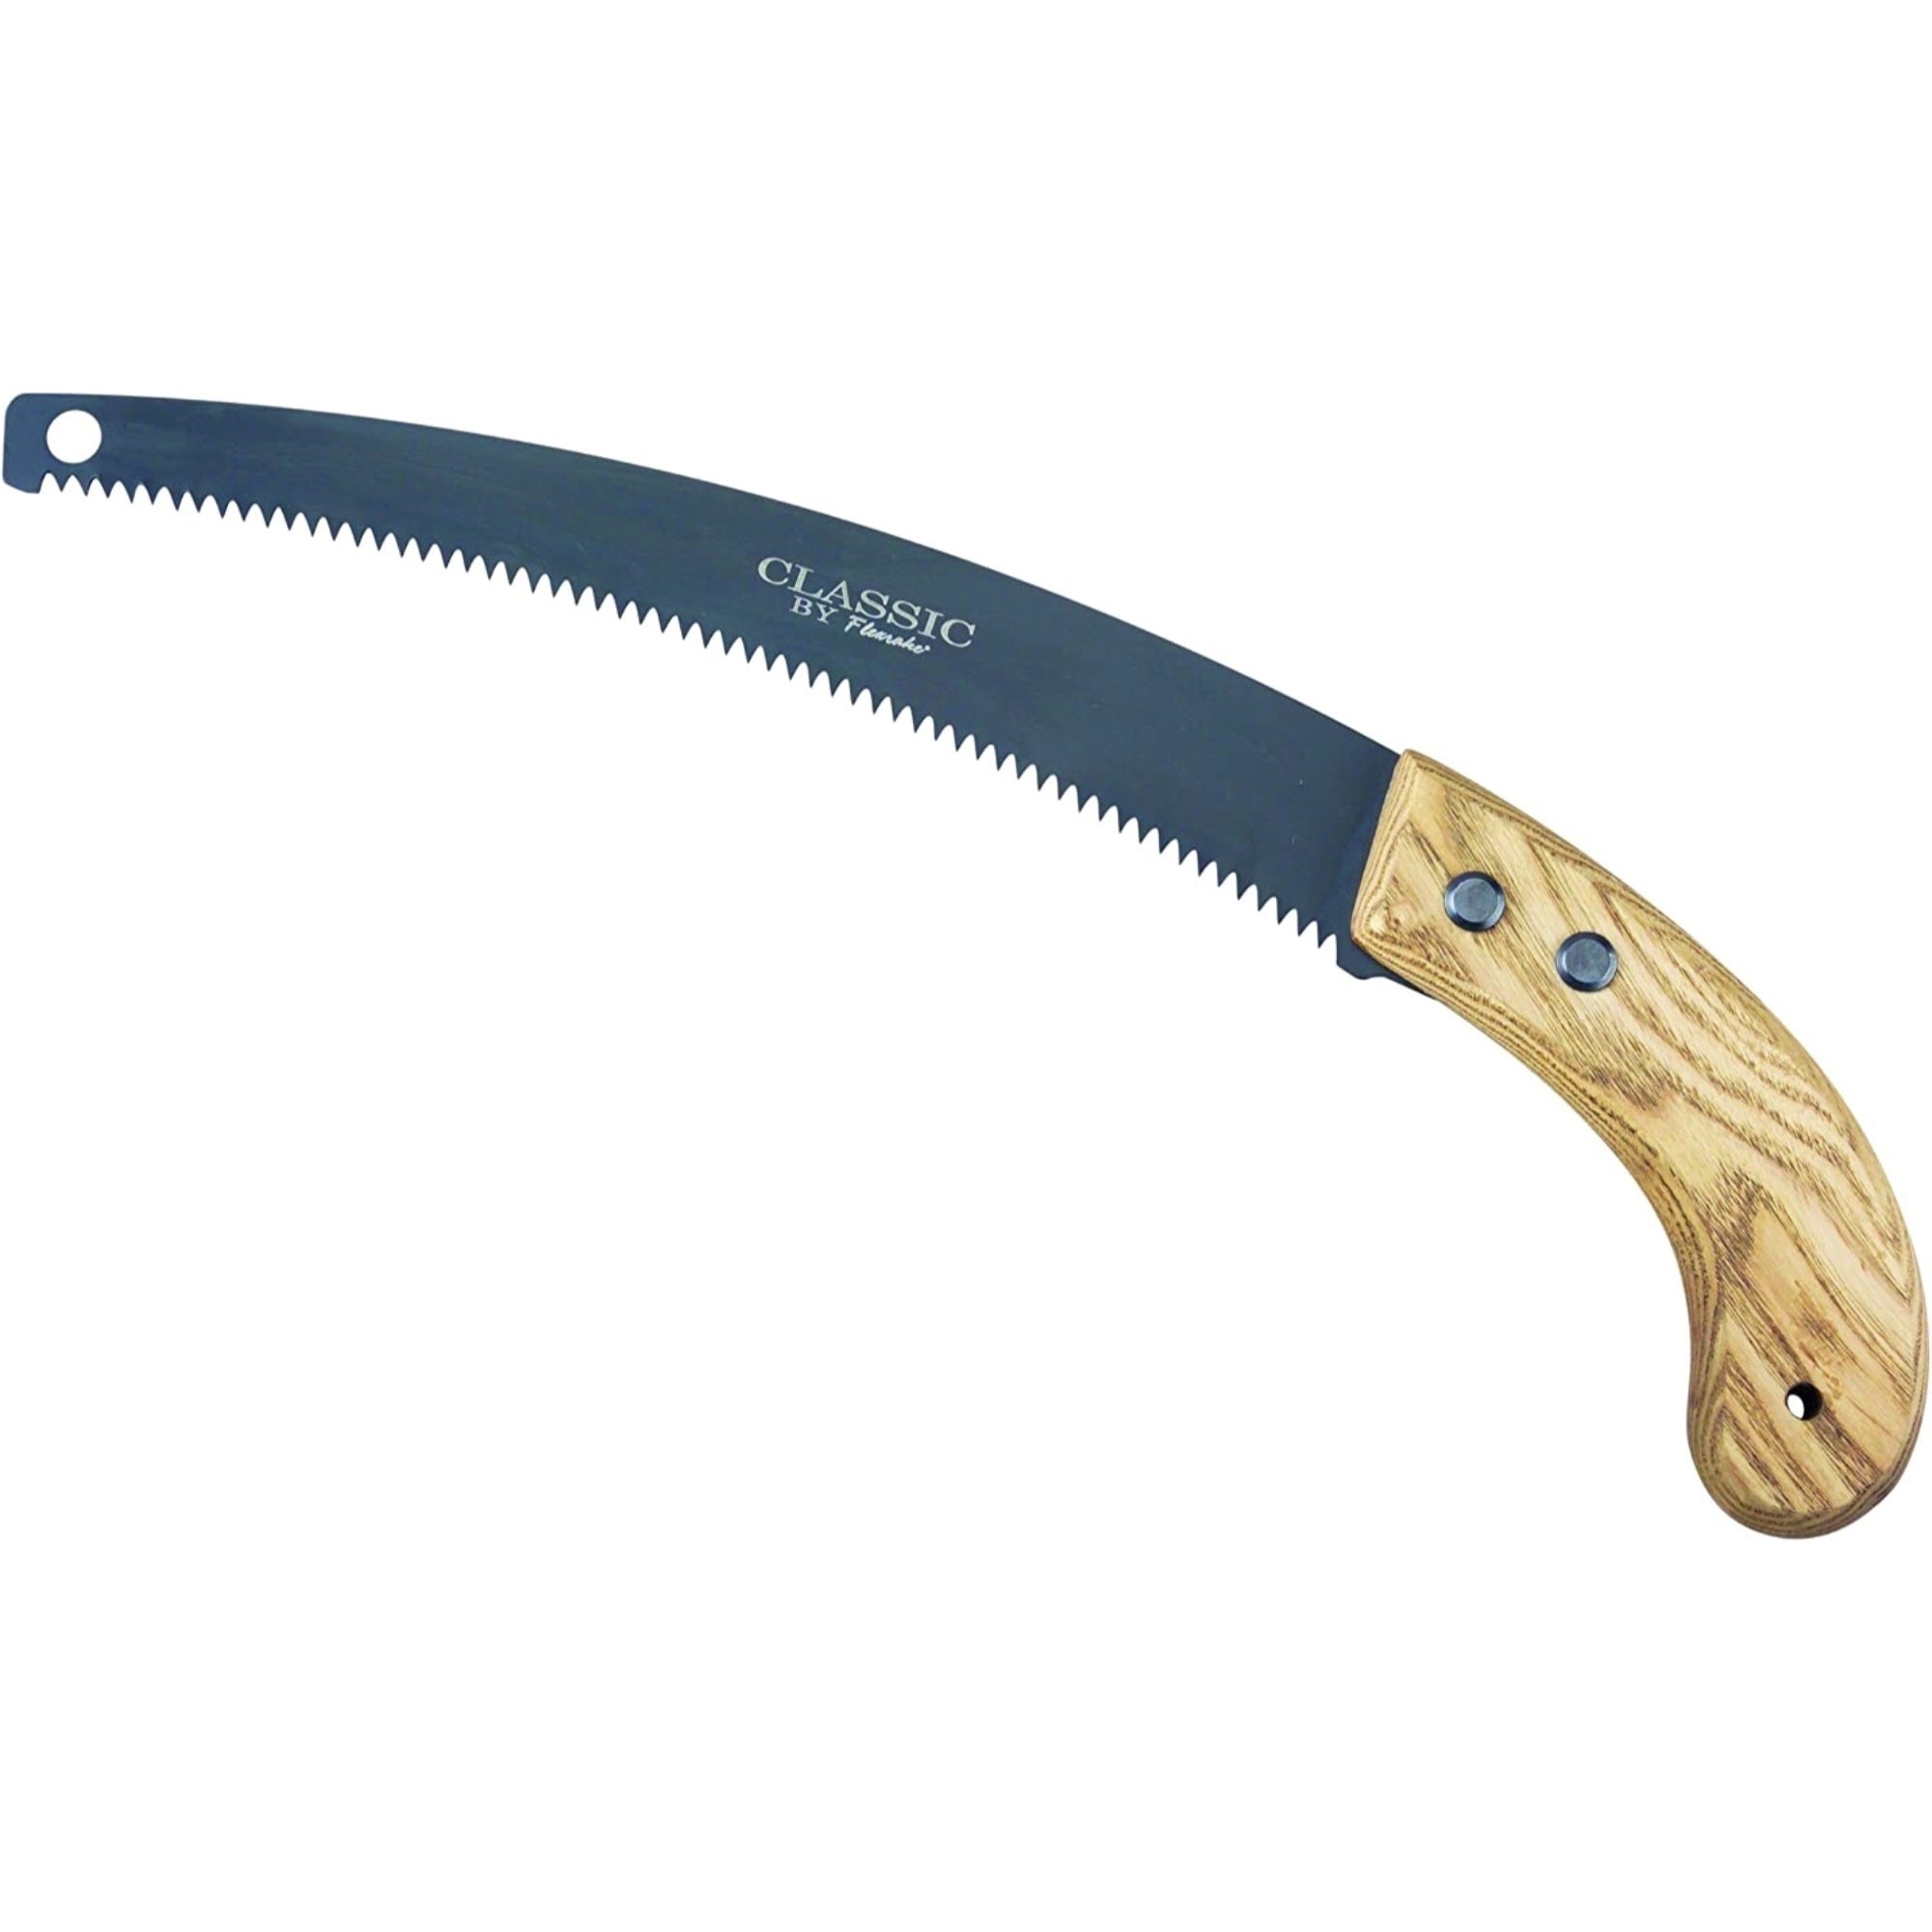 Flexrake Classic Wooden Handled Pruning Saw for Gardening and Lawnwork, 10"